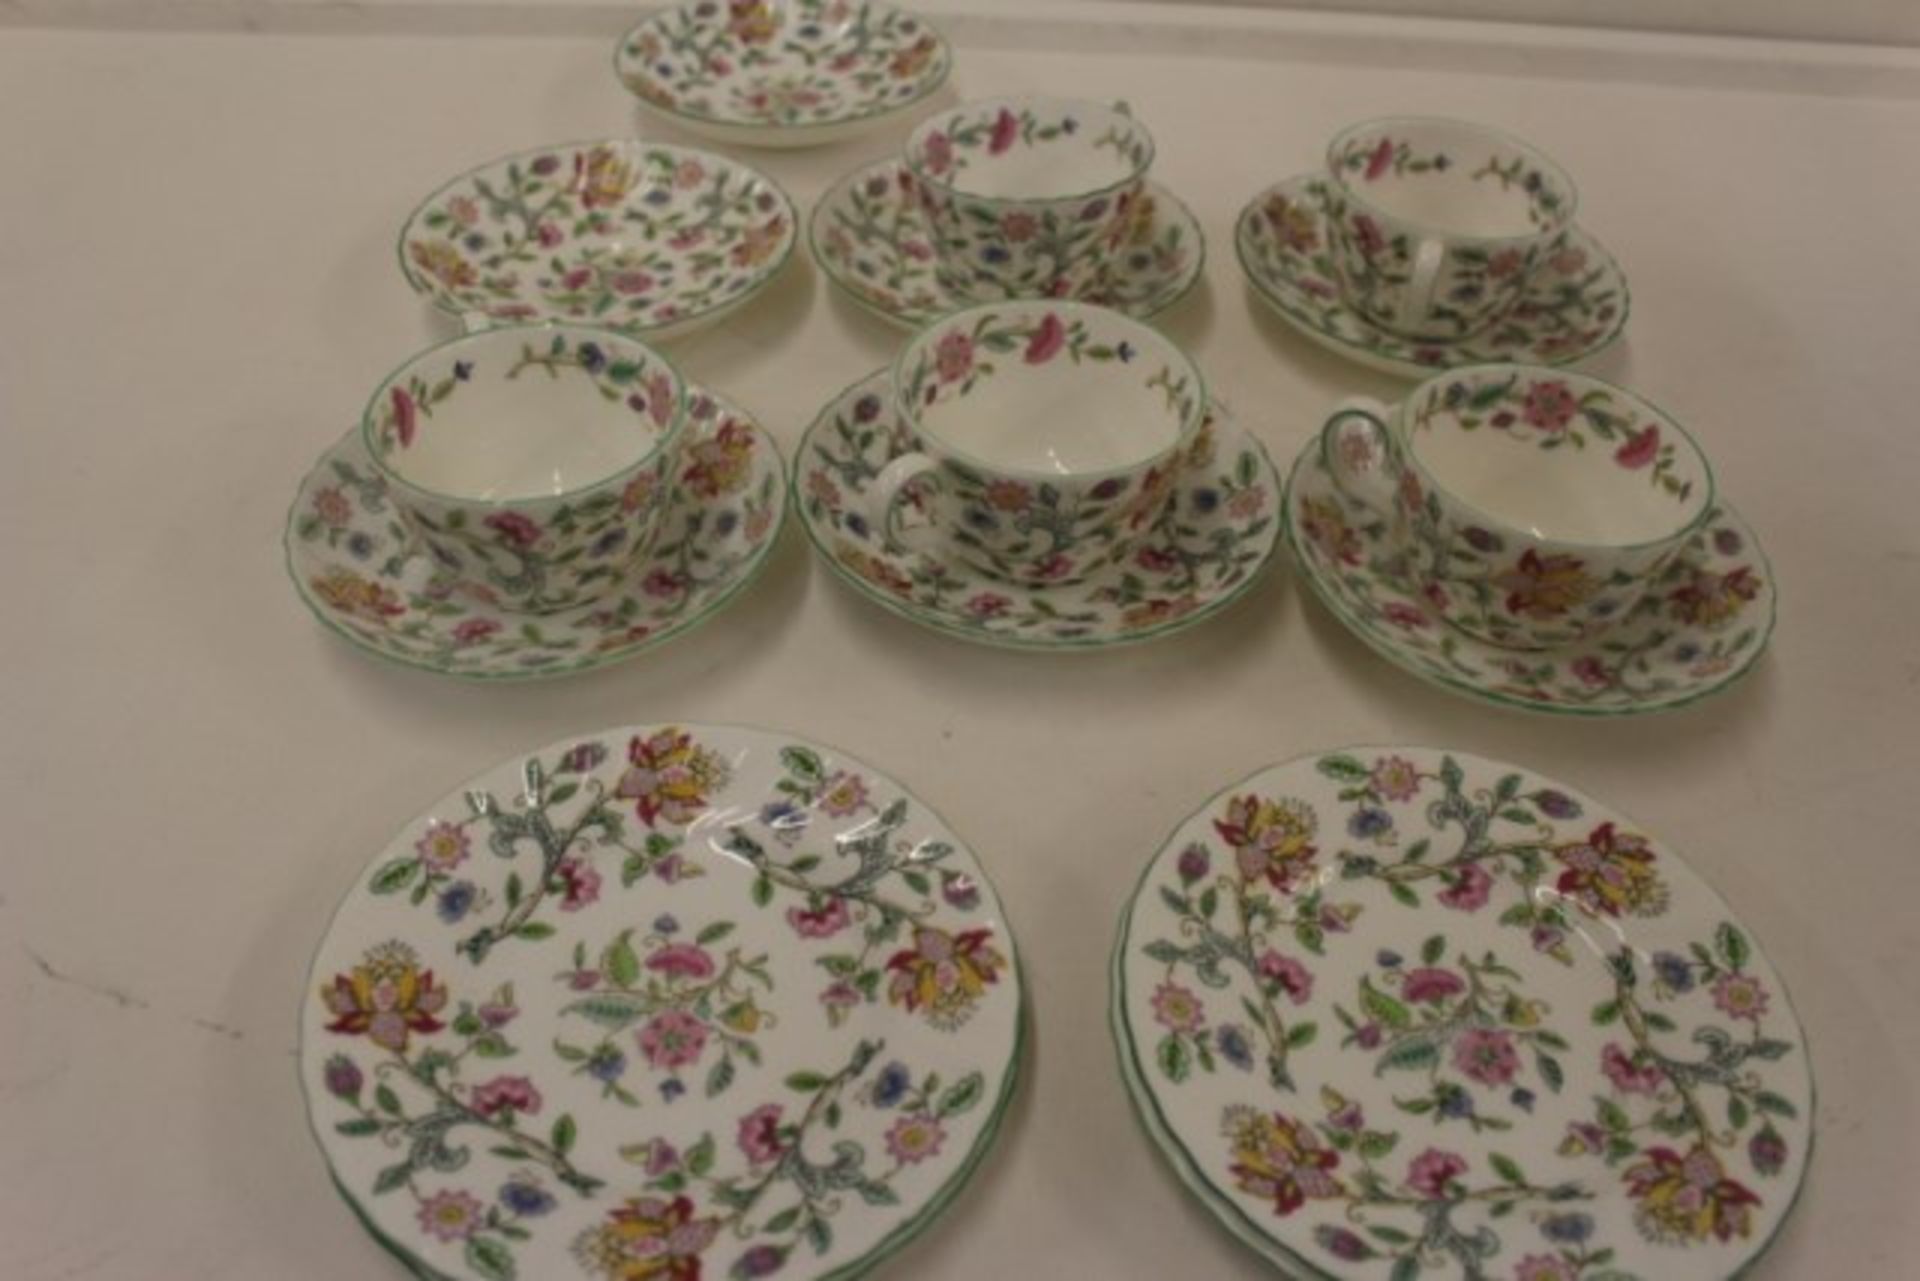 Minton "Hadden Hall" By J Wordsworth - Cups - Saucers & Plates (16 Pieces)